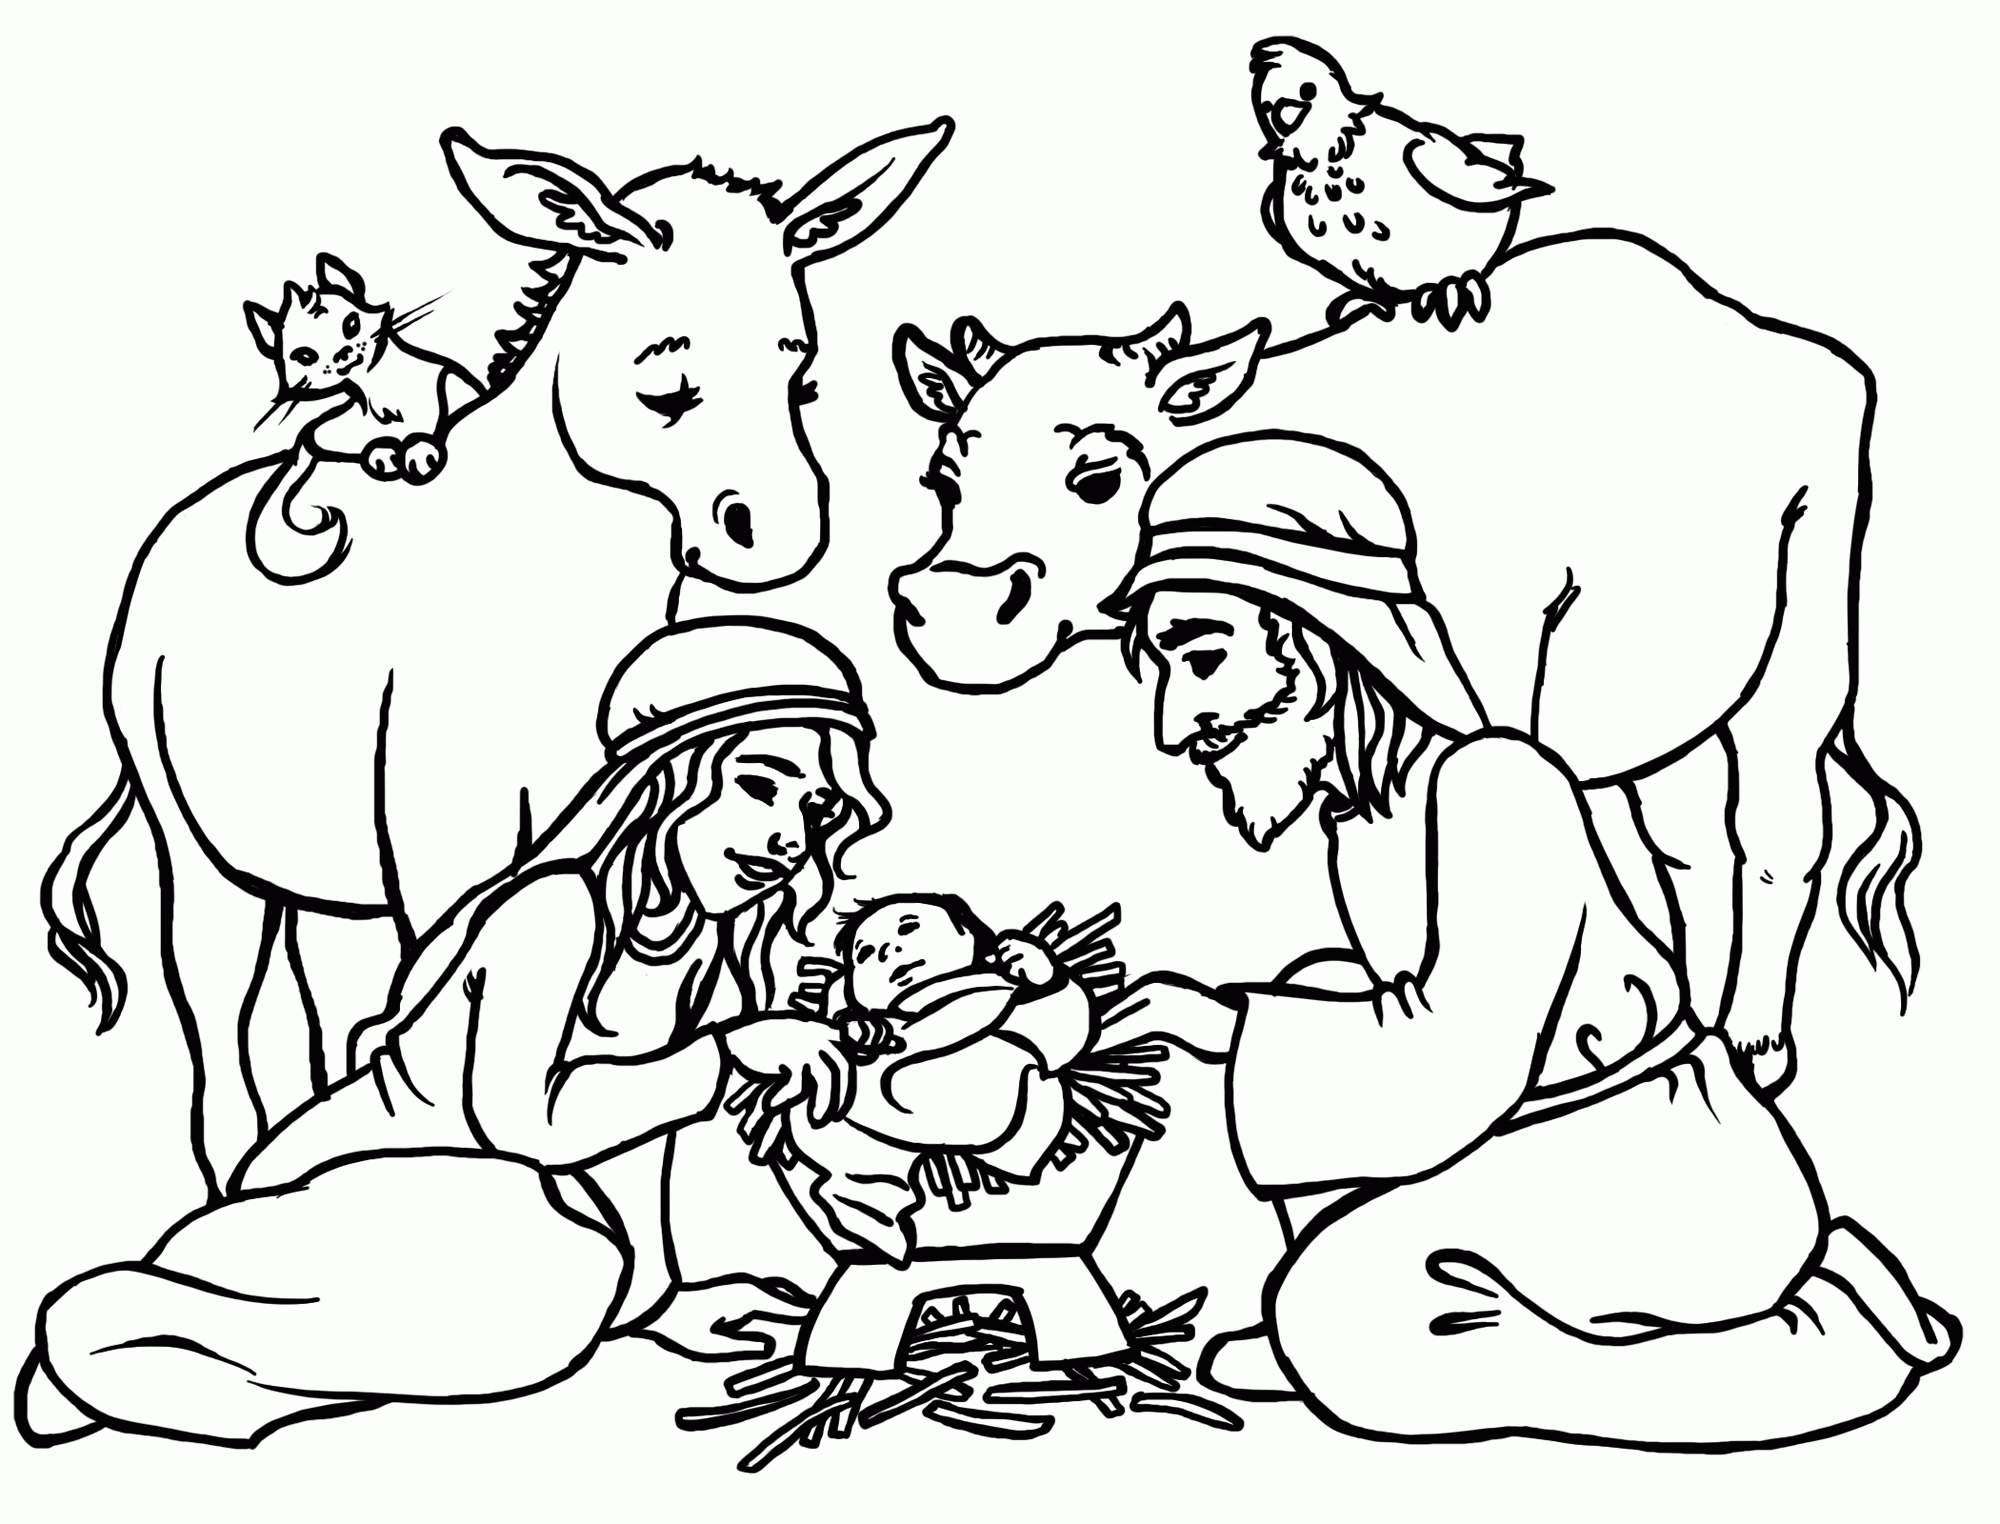 birth of jesus christ coloring pages